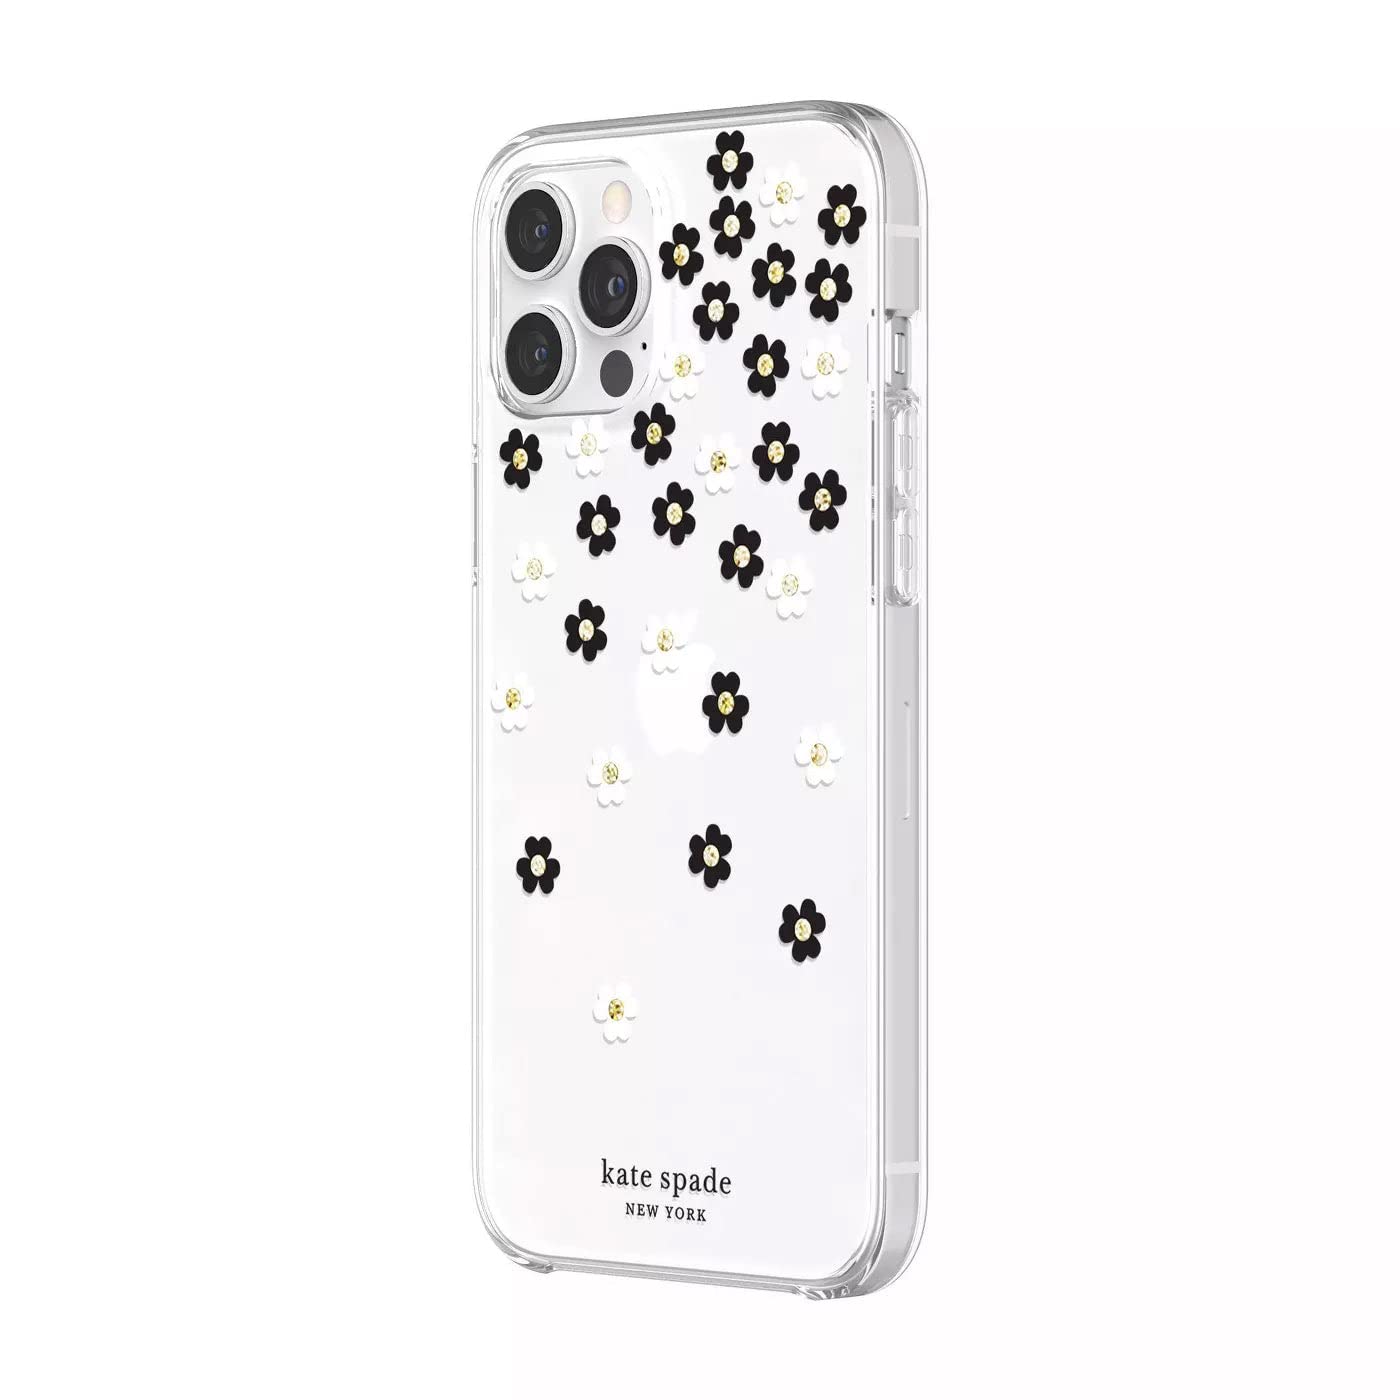 Kate Spade New York Protective Hardshell Case for iPhone 12 & iPhone 12 Pro - Scattered Flowers Black/White/Gold Gems/Clear/White Bumper, KSIPH153SFLBW